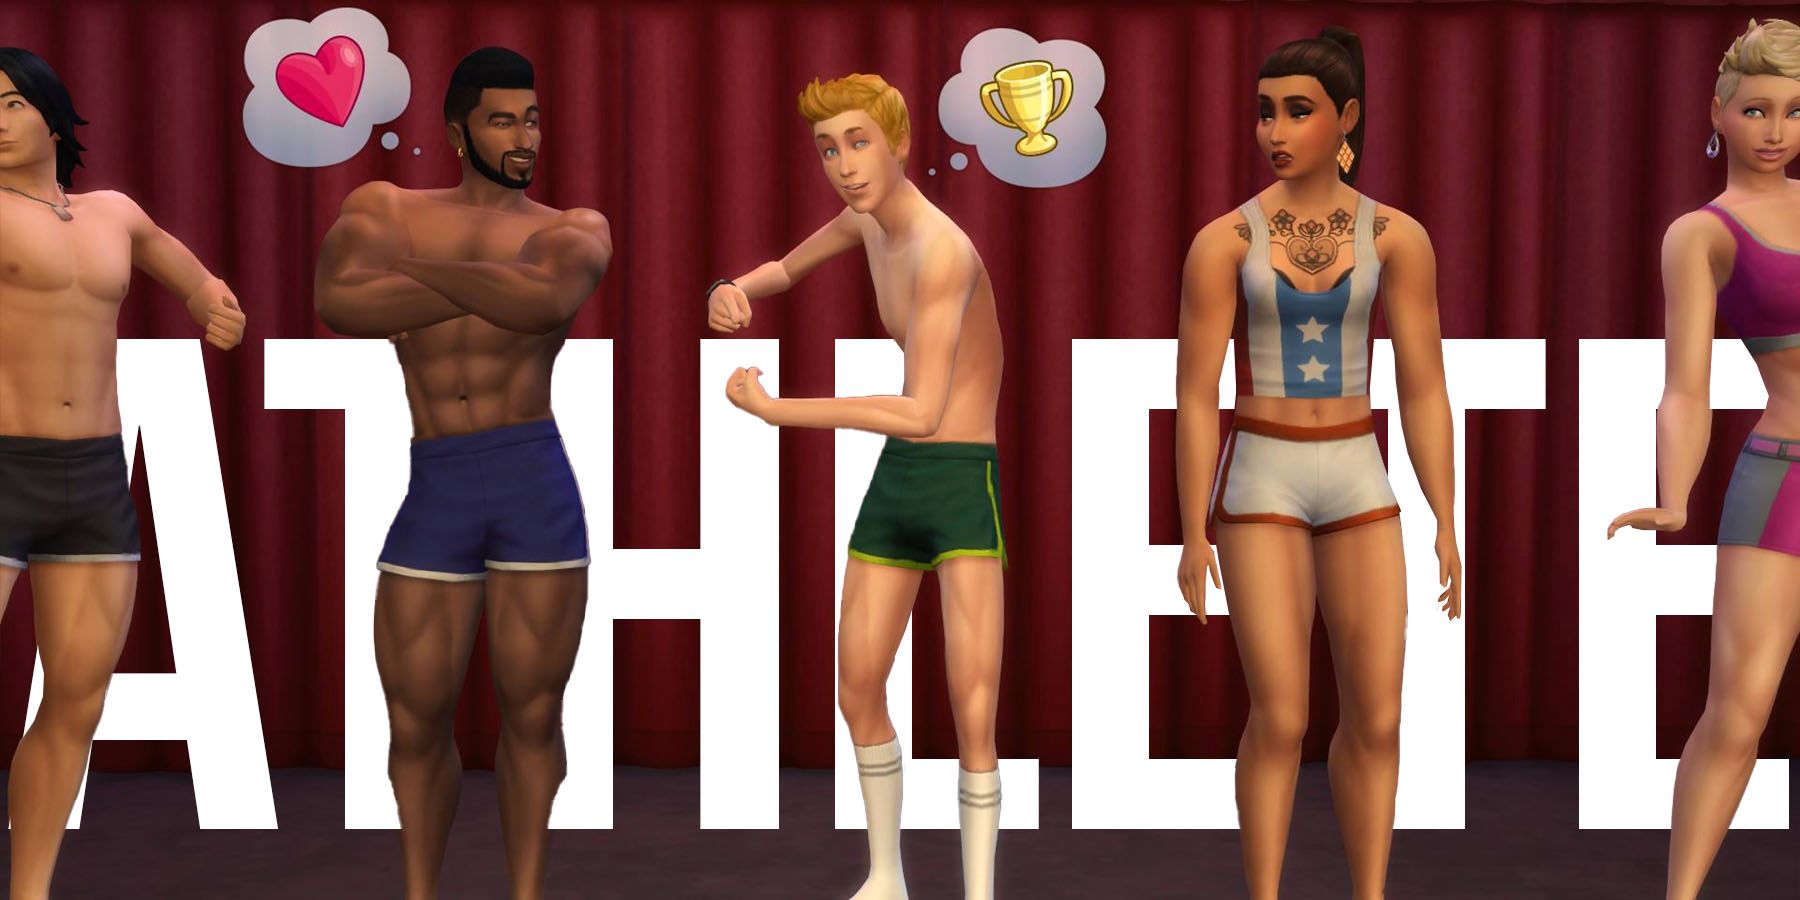 Sims 4: Athletic Career Guide